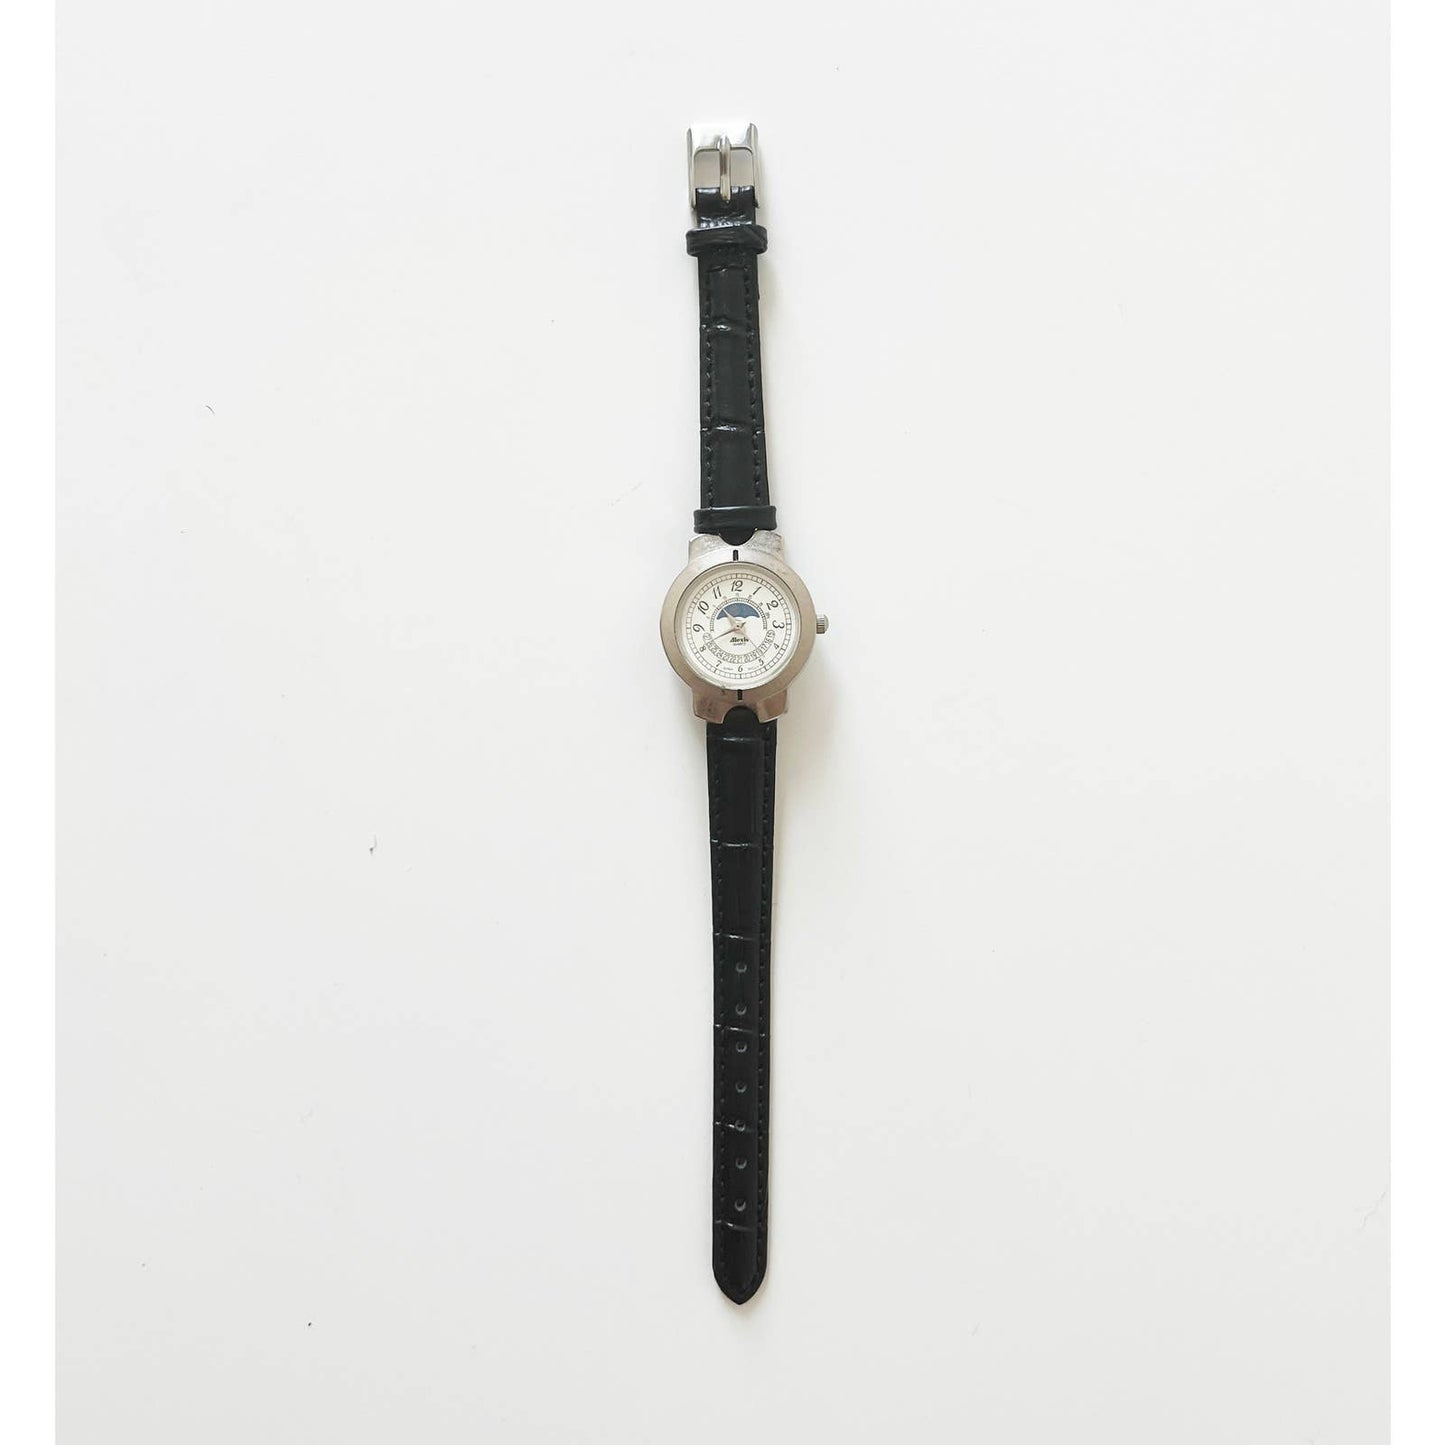 Vintage Croc Alexis Leather Watch with Silver Details | New Band and Battery